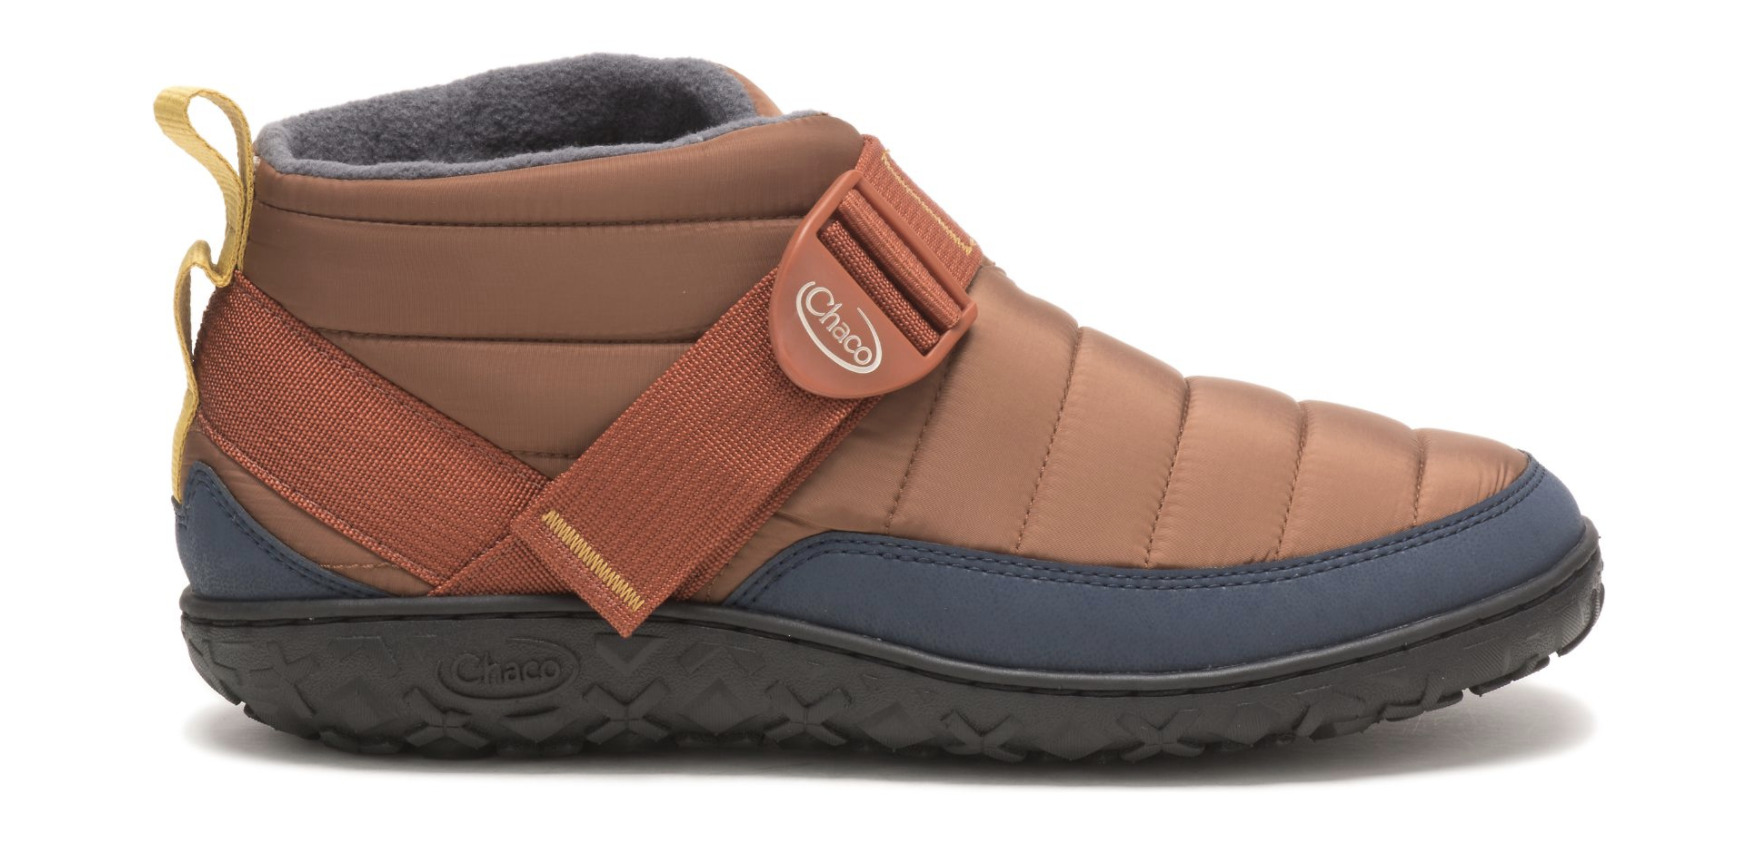 Chaco's technical men's slippers